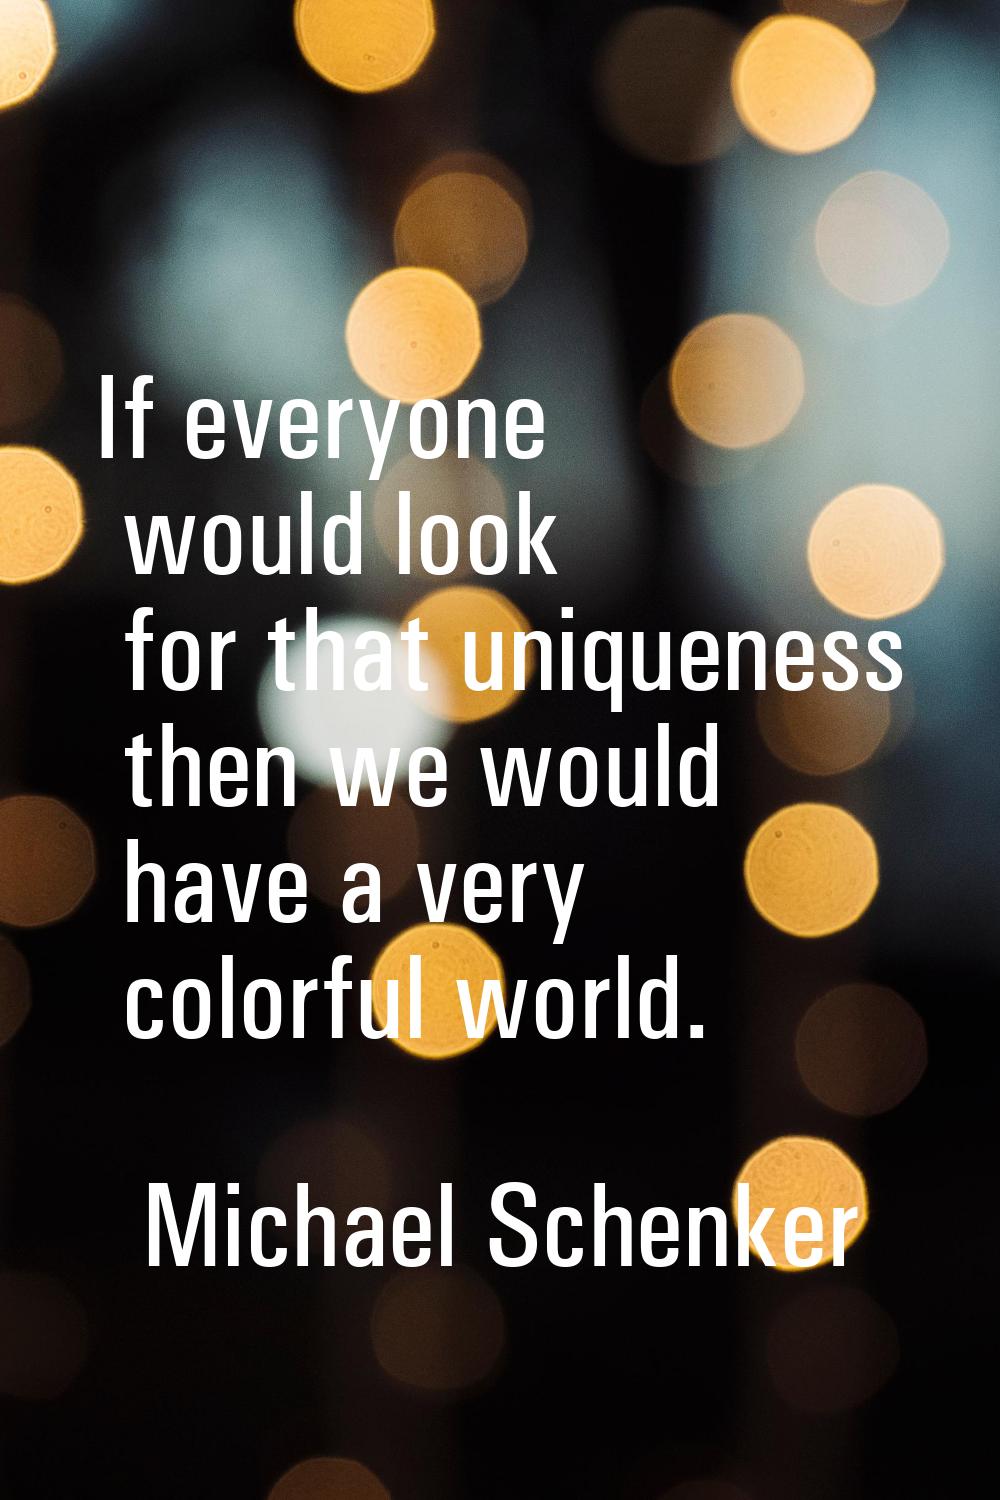 If everyone would look for that uniqueness then we would have a very colorful world.